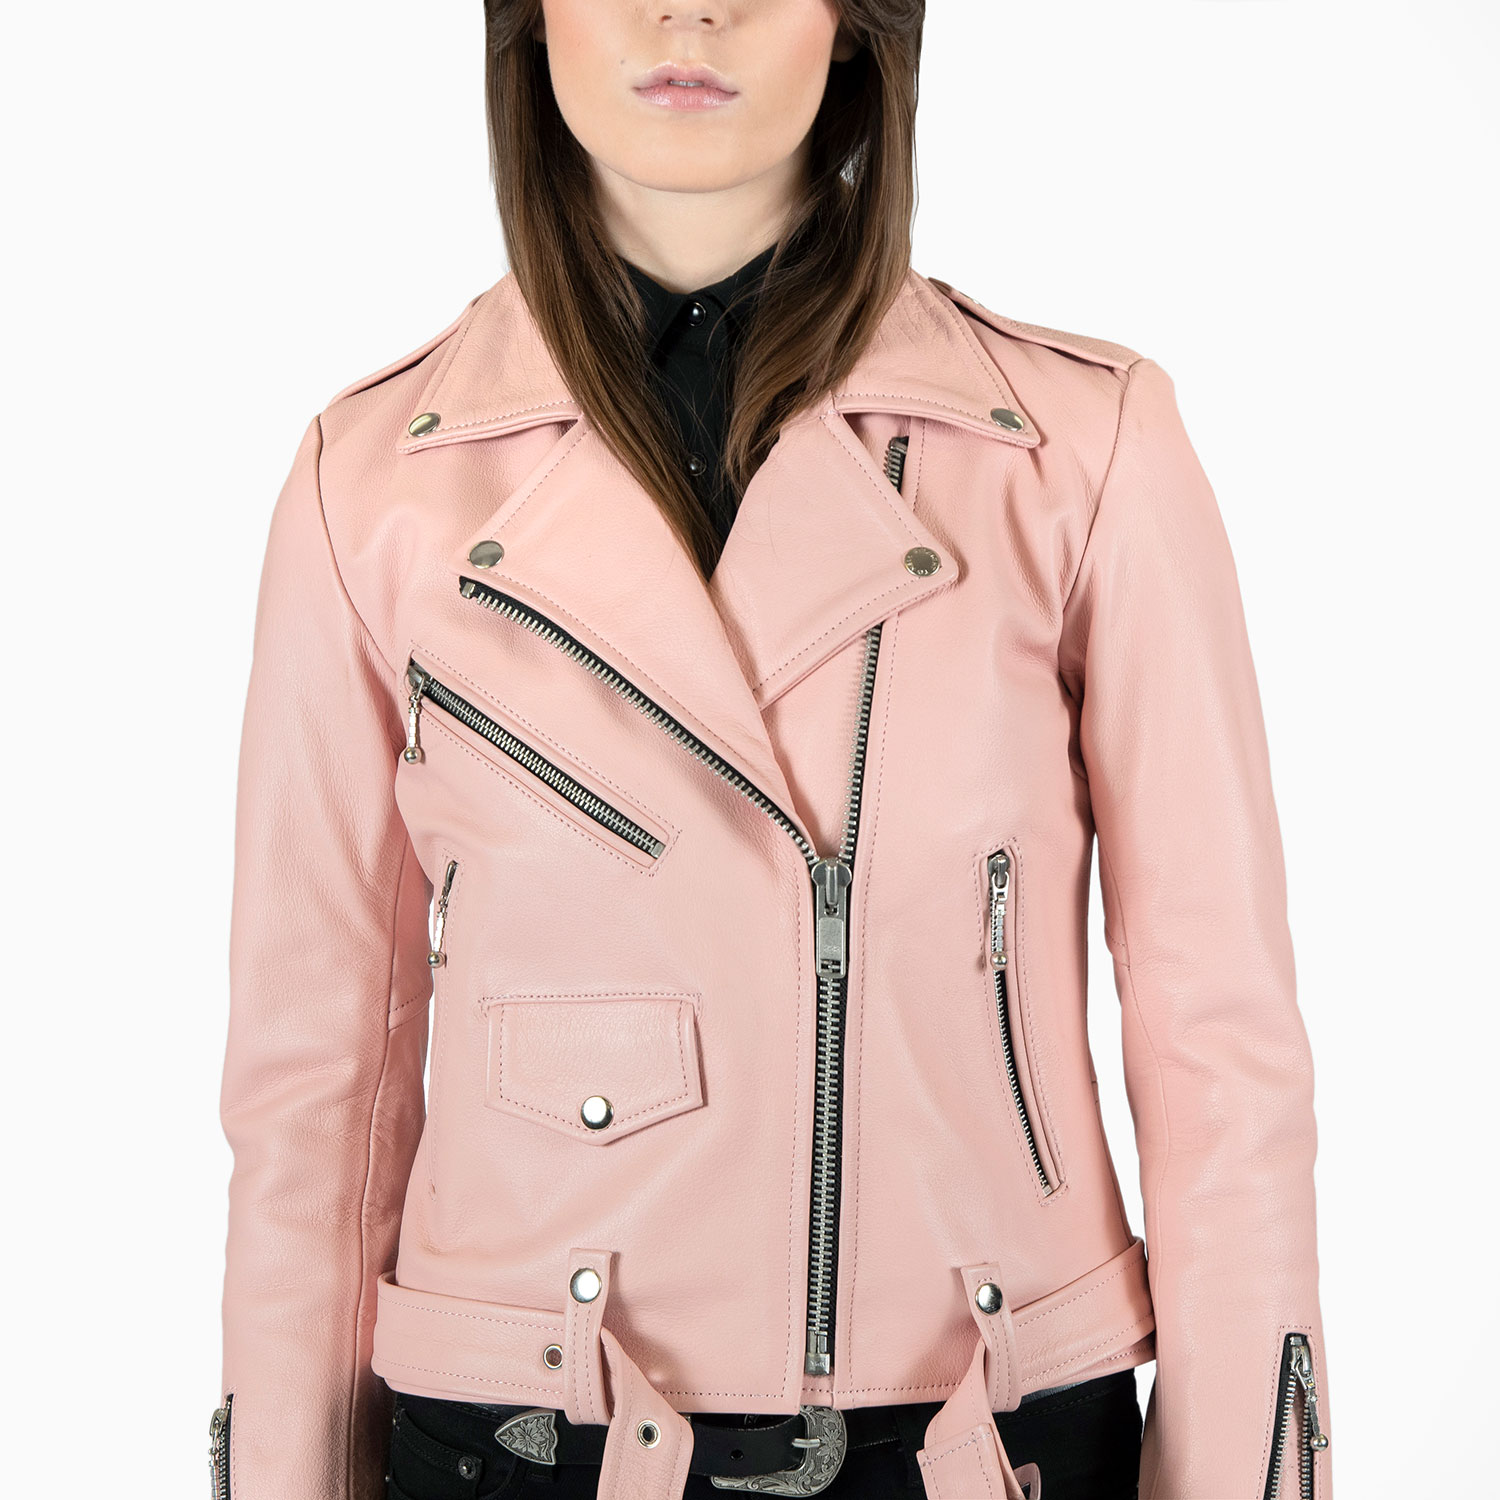 Commando - Dusty Pink Straight L, 2XL, Jacket Leather 4XL) (Size | Hell Apparel S, 3XL, M, XL, To XS